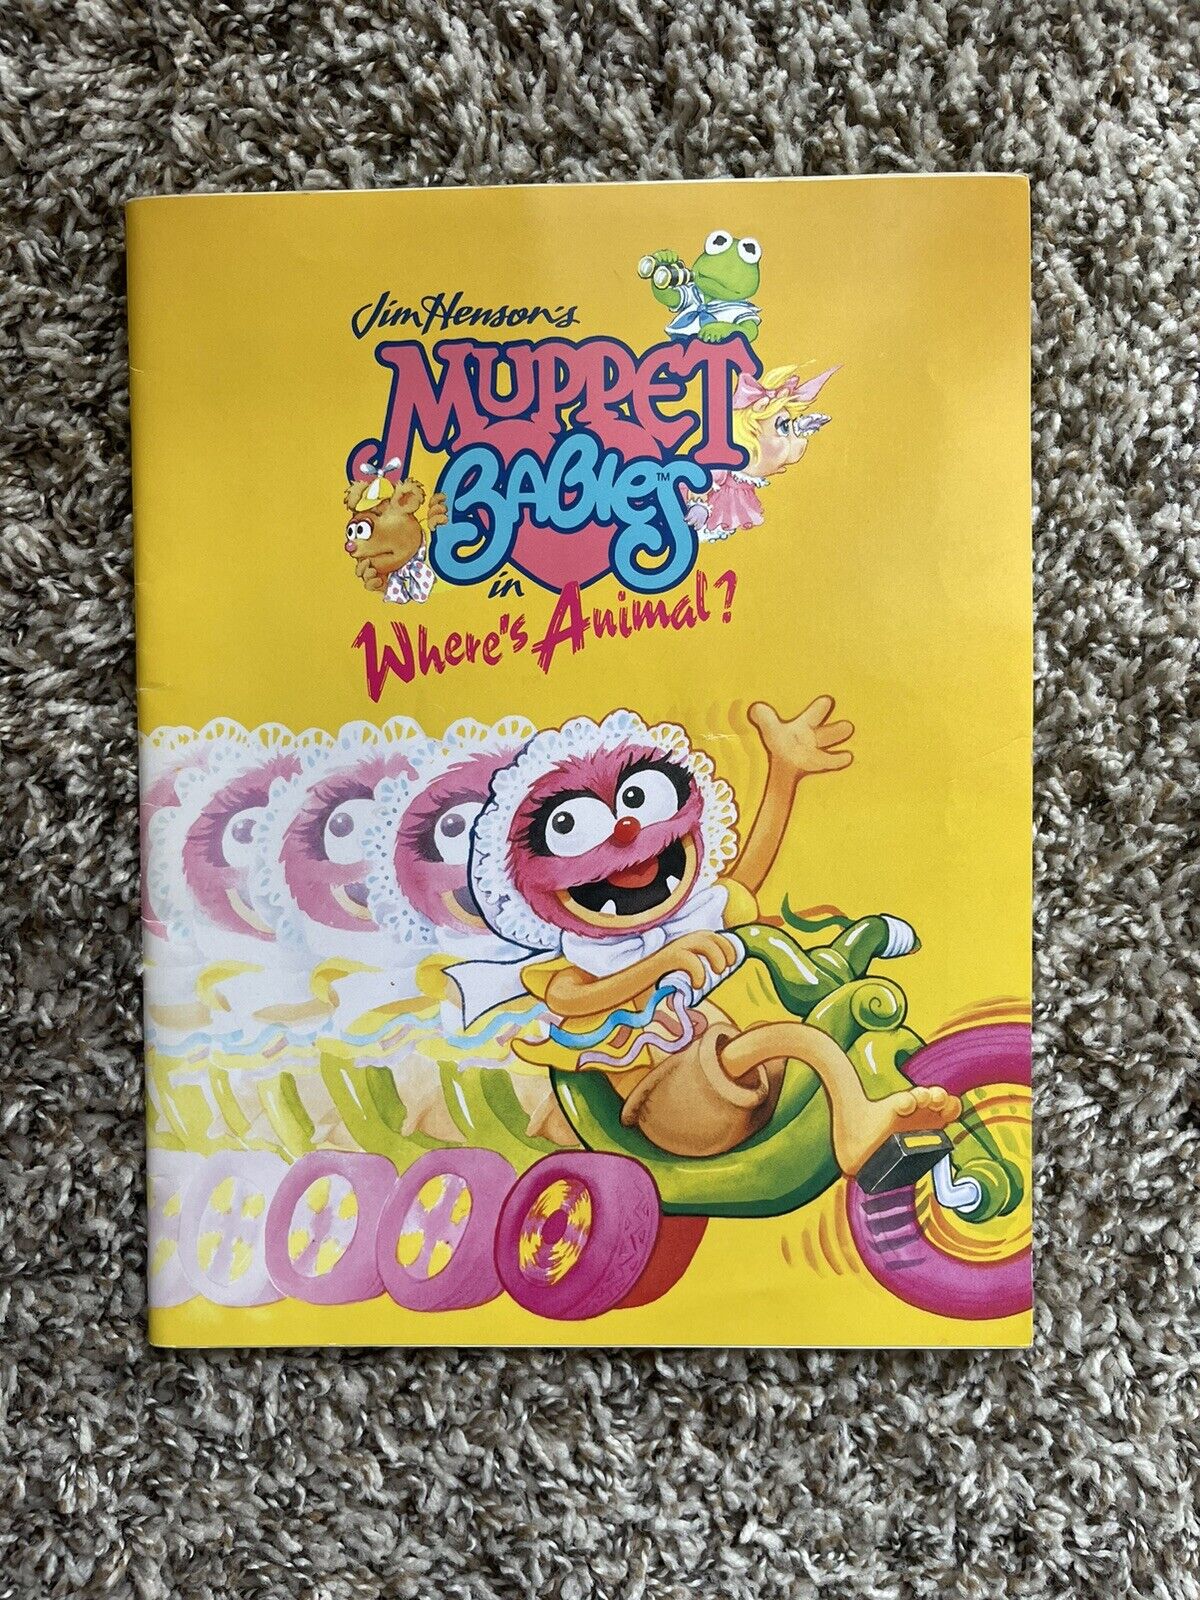 Vintage Jim Henson’s Muppet Babies in Where's Animal Book